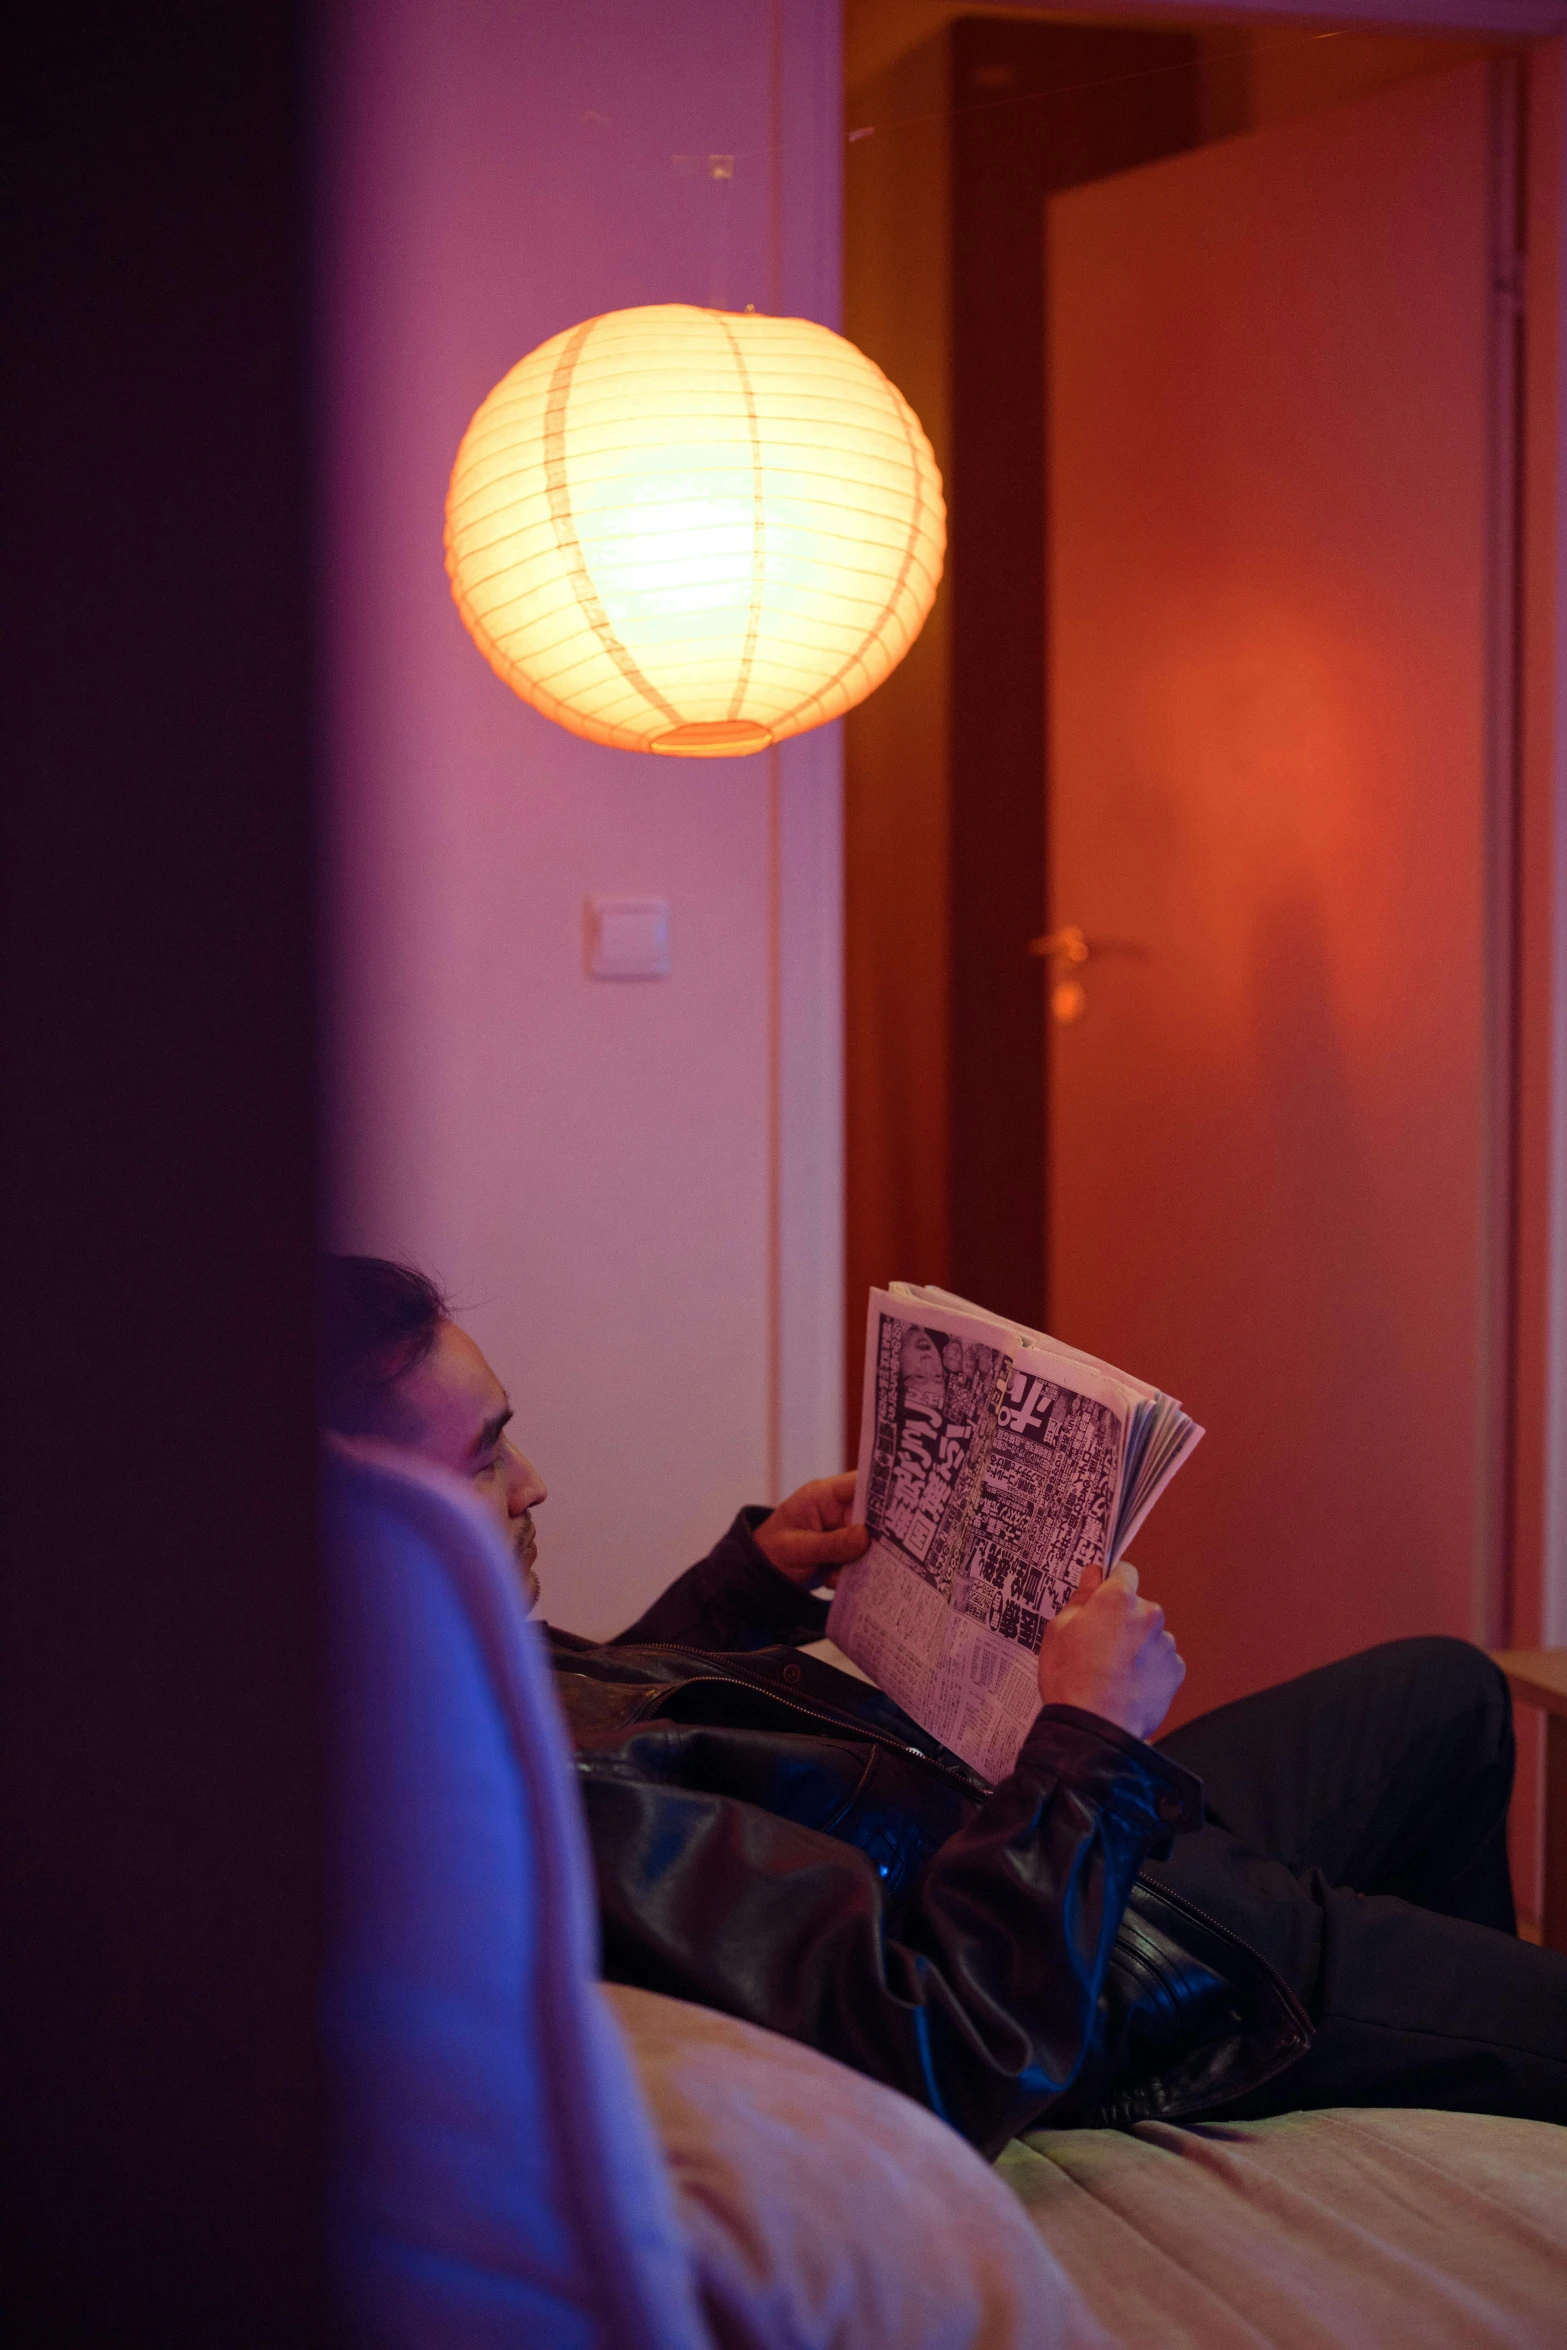 a person laying on a bed reading a book, by Jan Tengnagel, happening, cinematic neon uplighting, inside a cozy apartment, reading a newspaper, cinematic shot ar 9:16 -n 6 -g